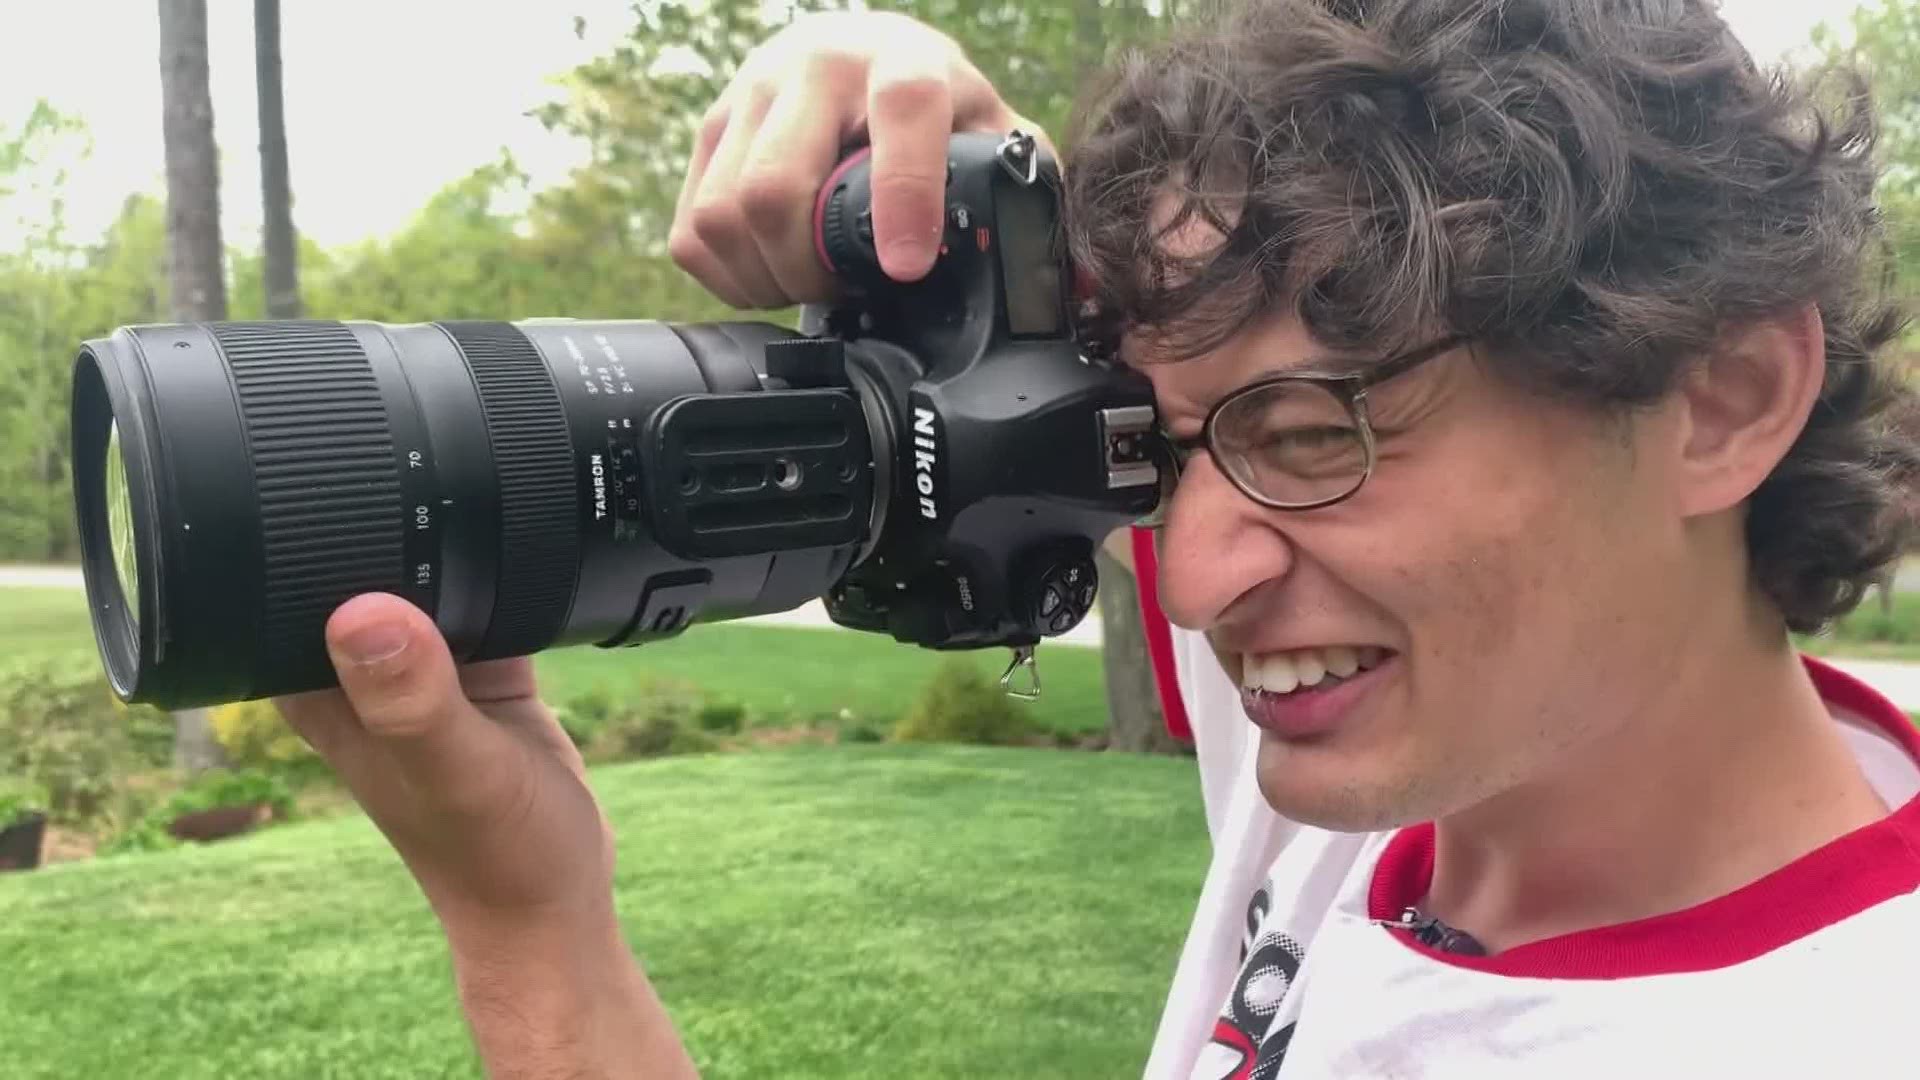 Scarborough senior Jacob Lewis isn't feeling bad for seniors missing out during Covid-19, he's using his talent in photography to make them feel celebrated.